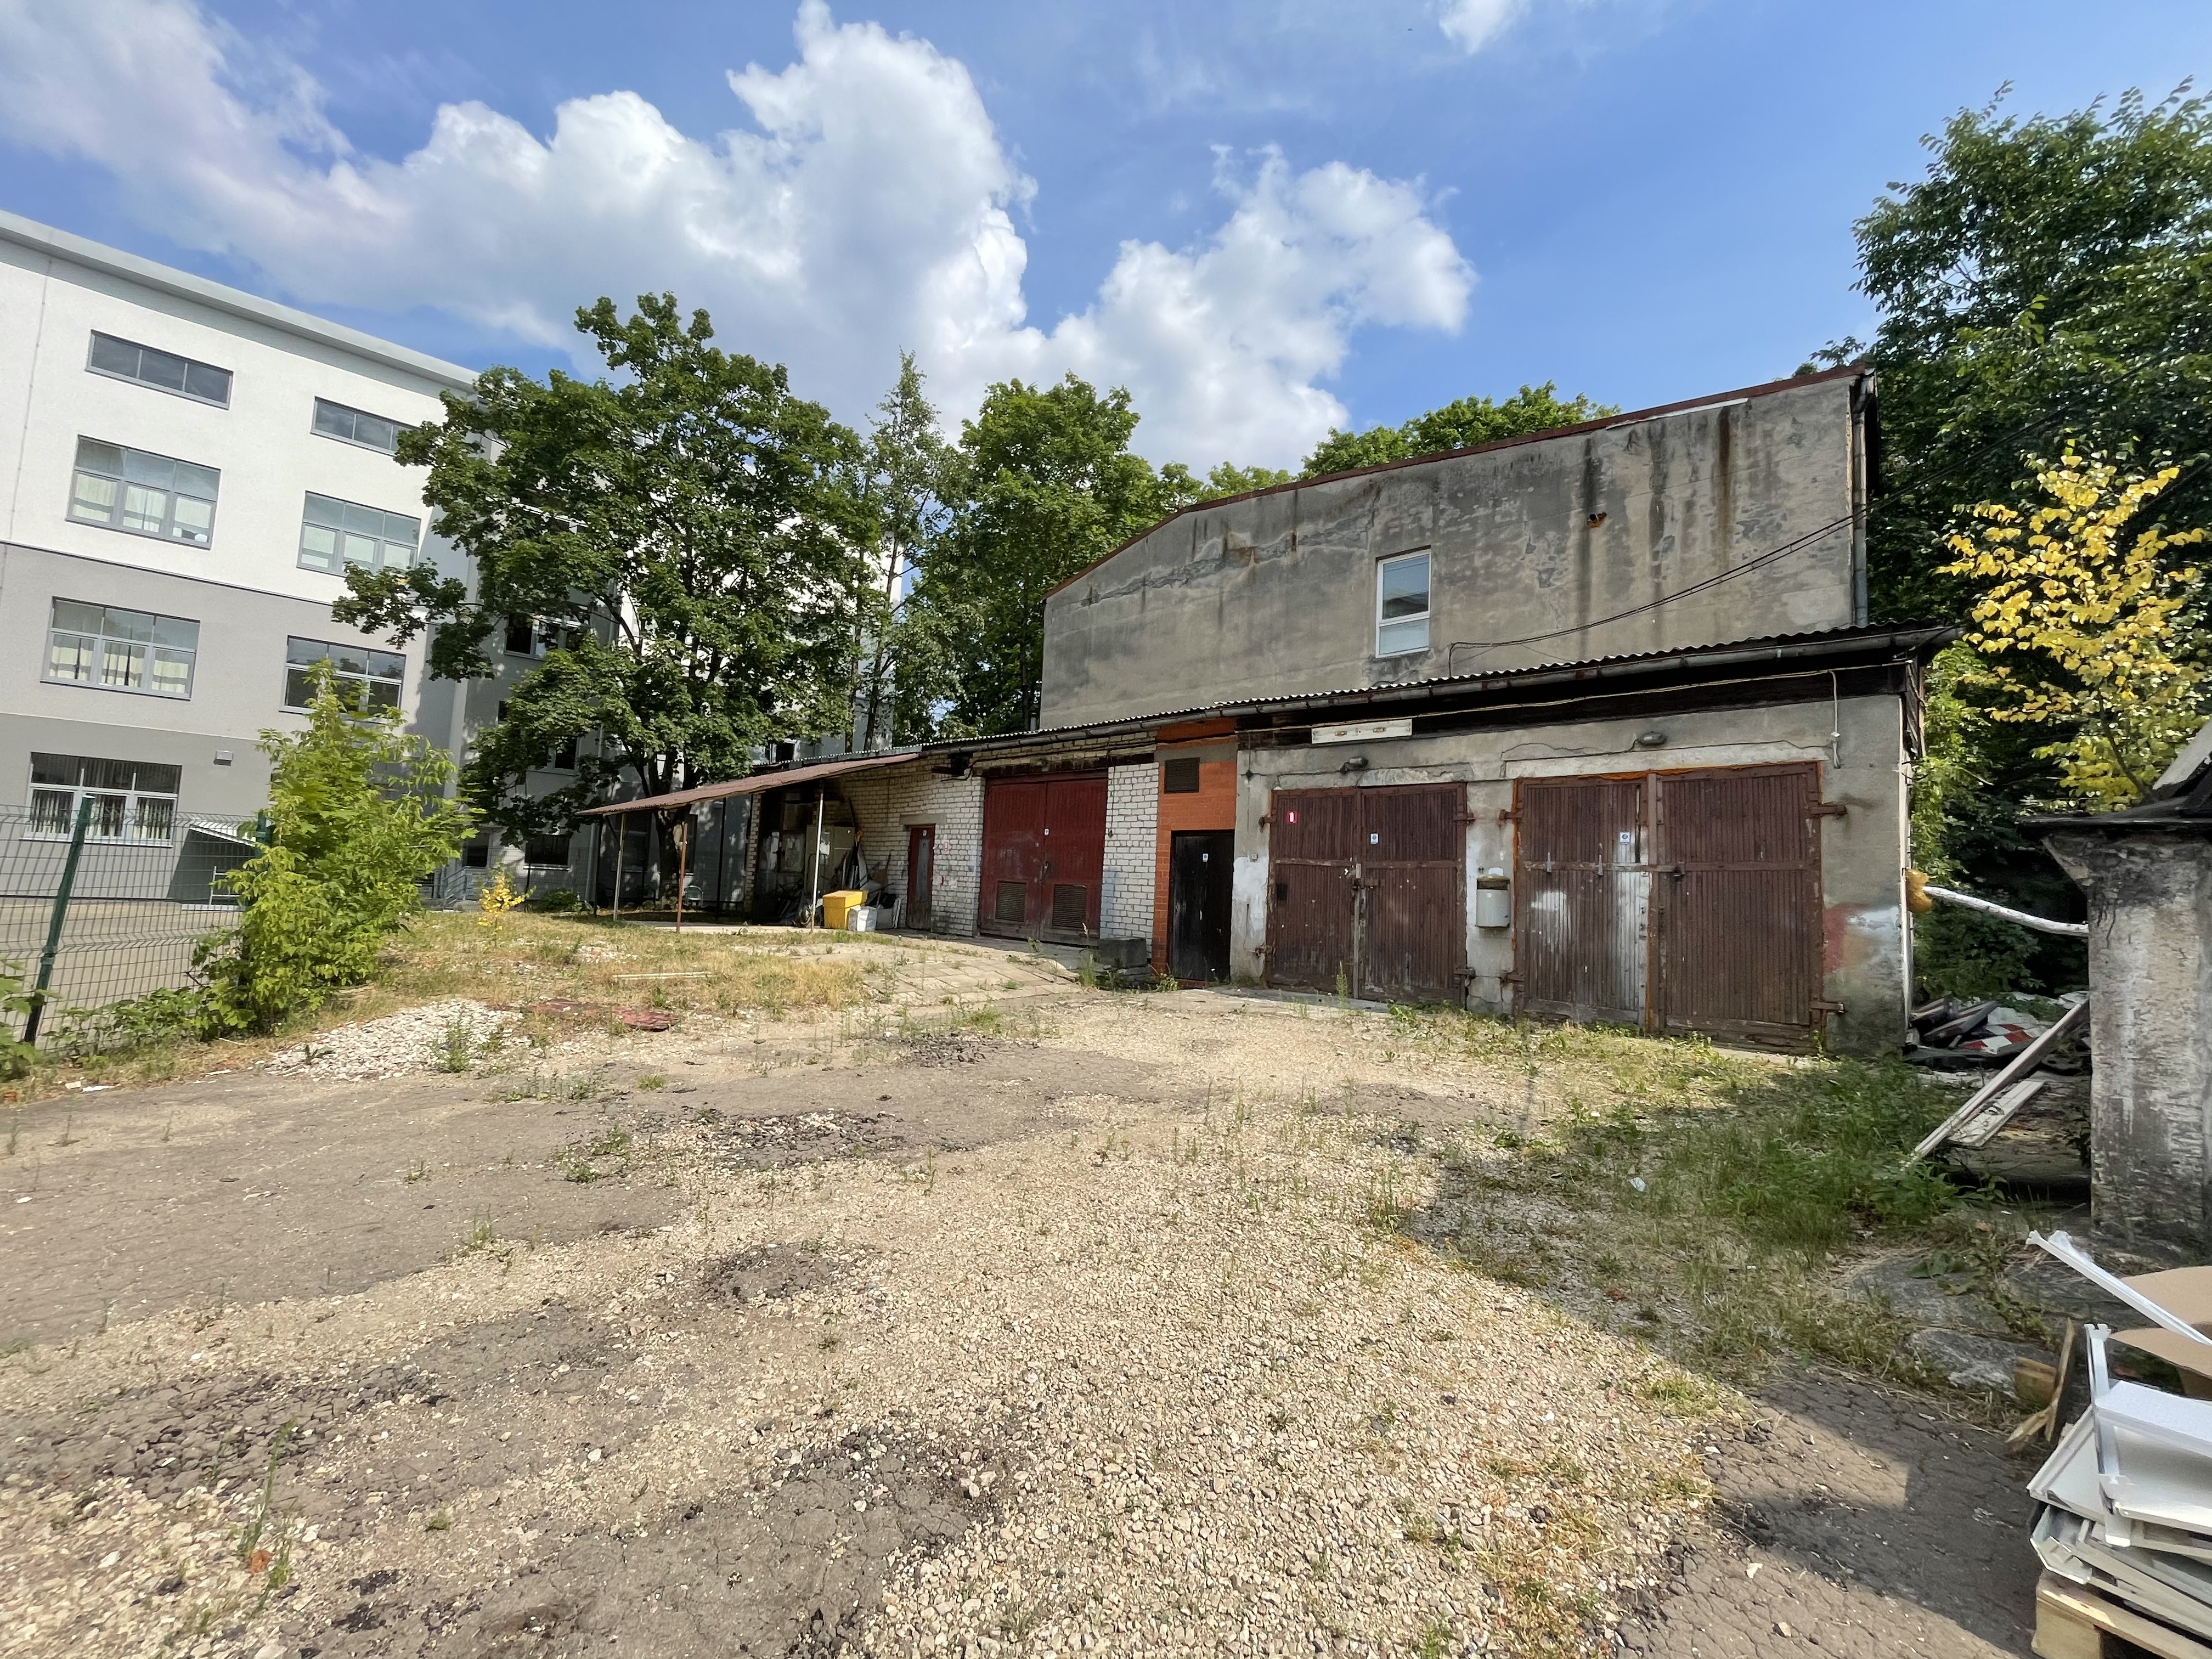 Investment property, Aiviekstes street - Image 1